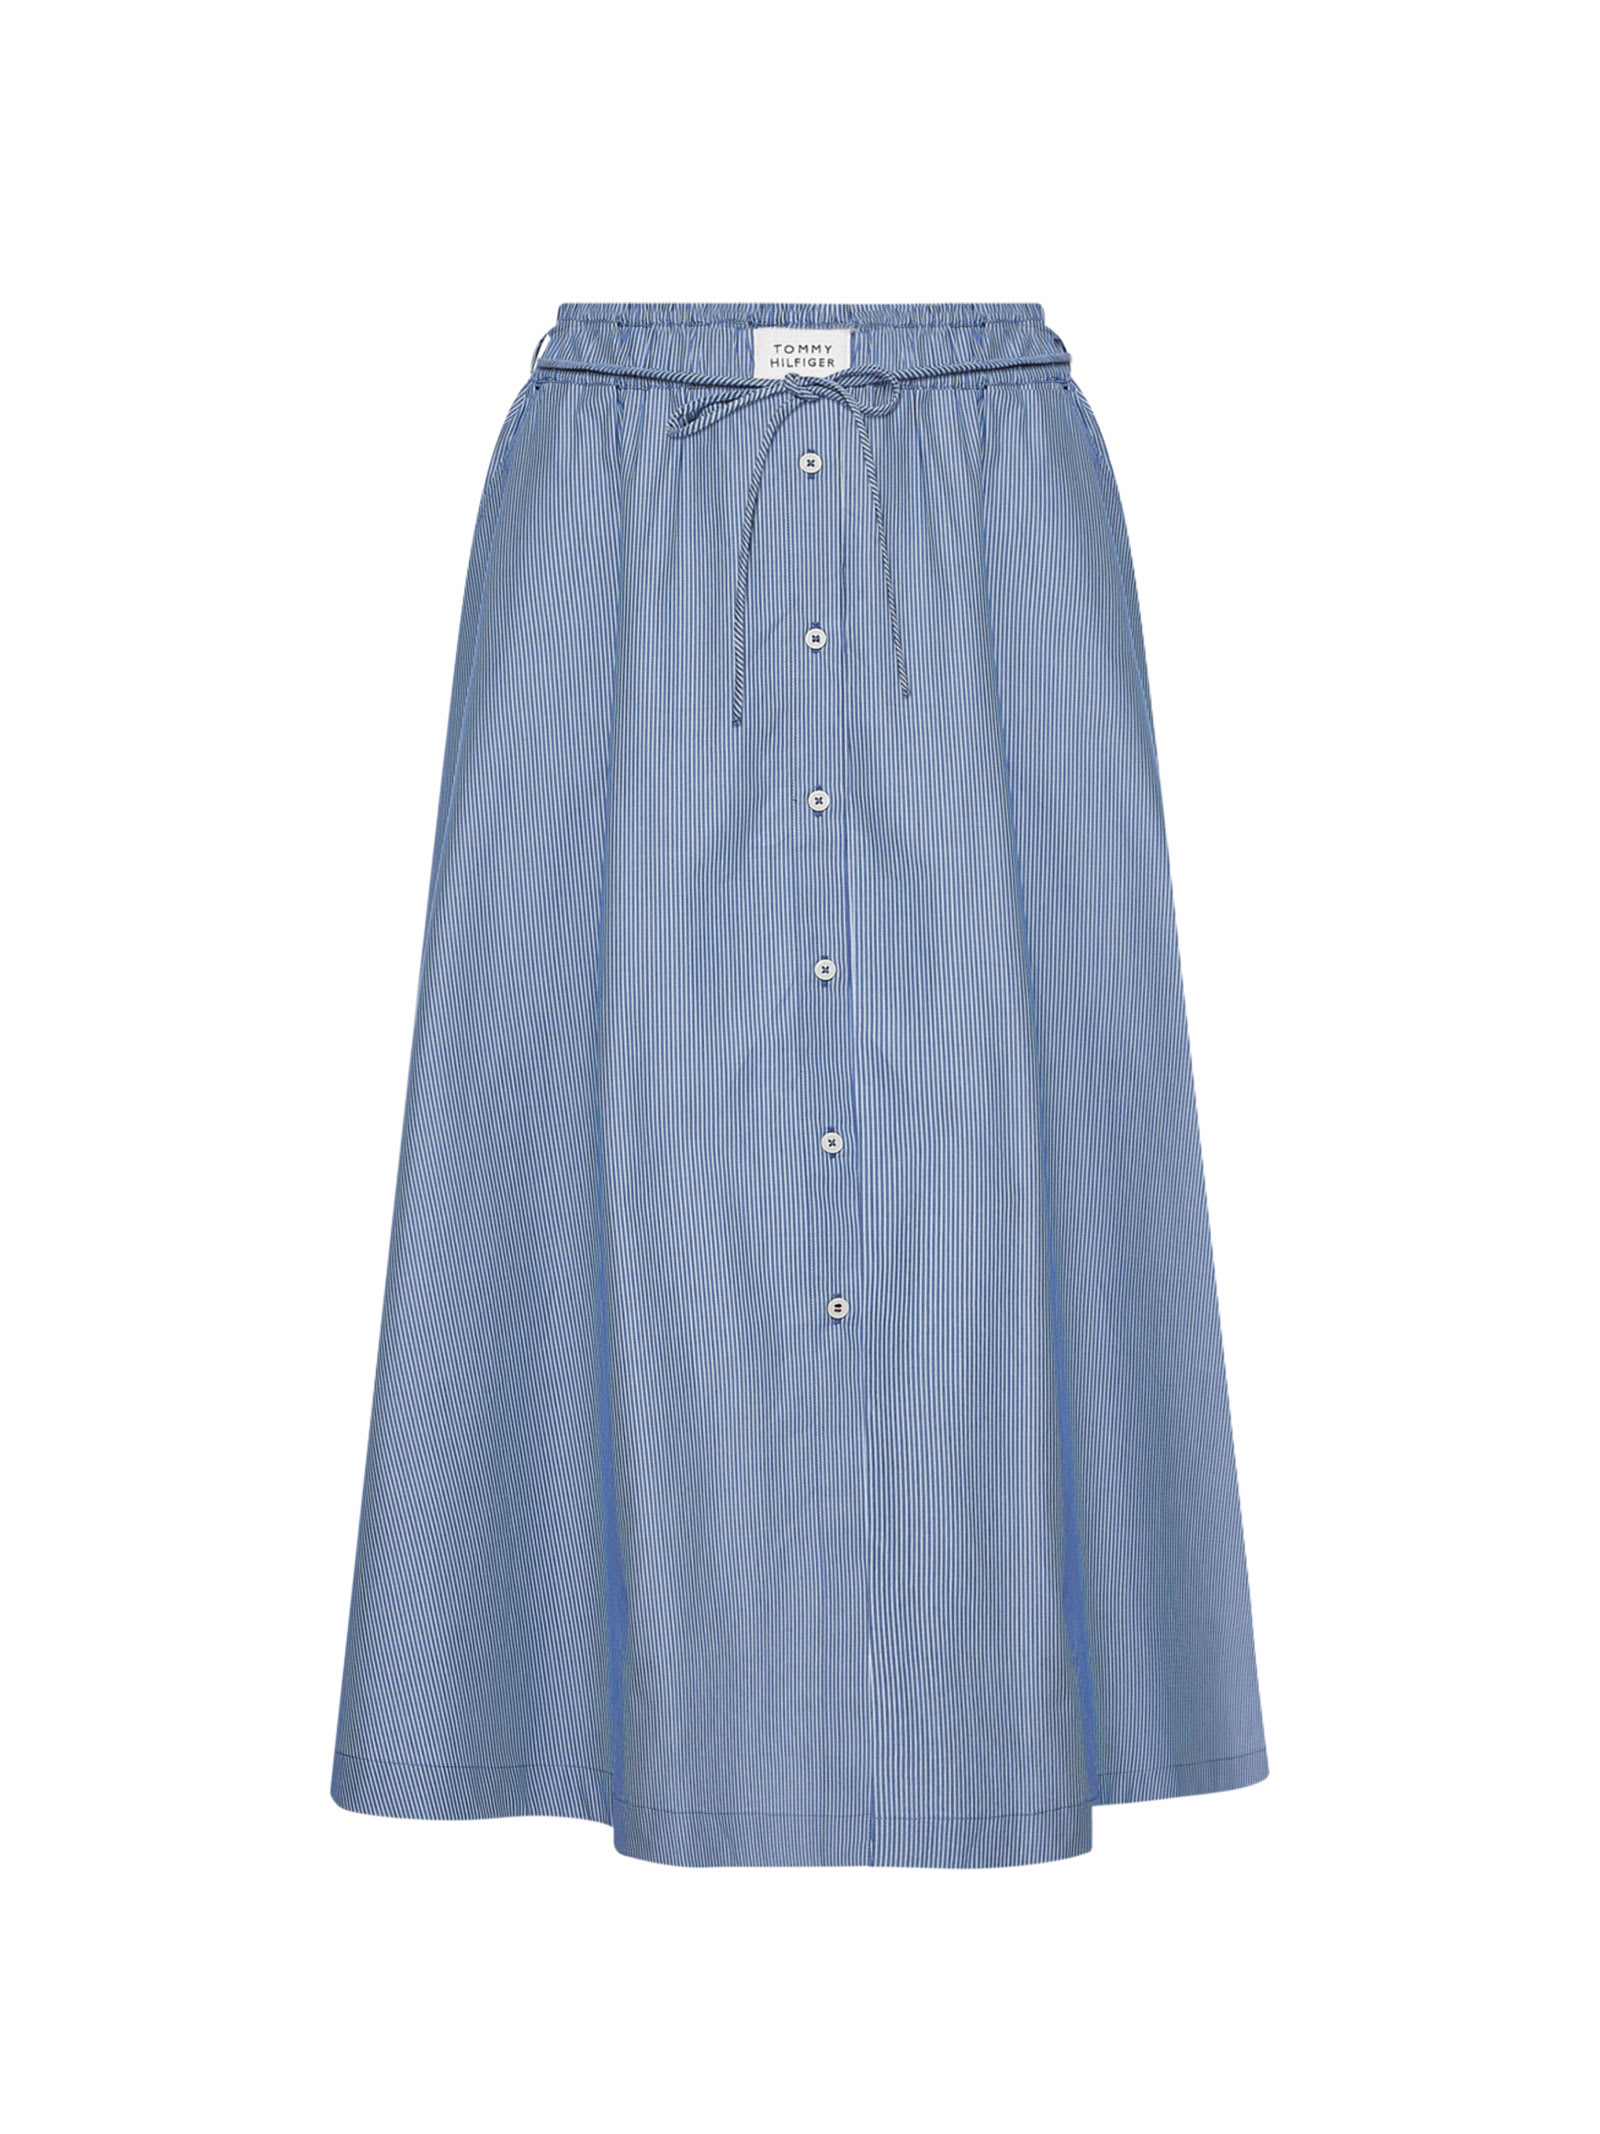 Tommy Hilfiger Cotton Skirt With Button Detail